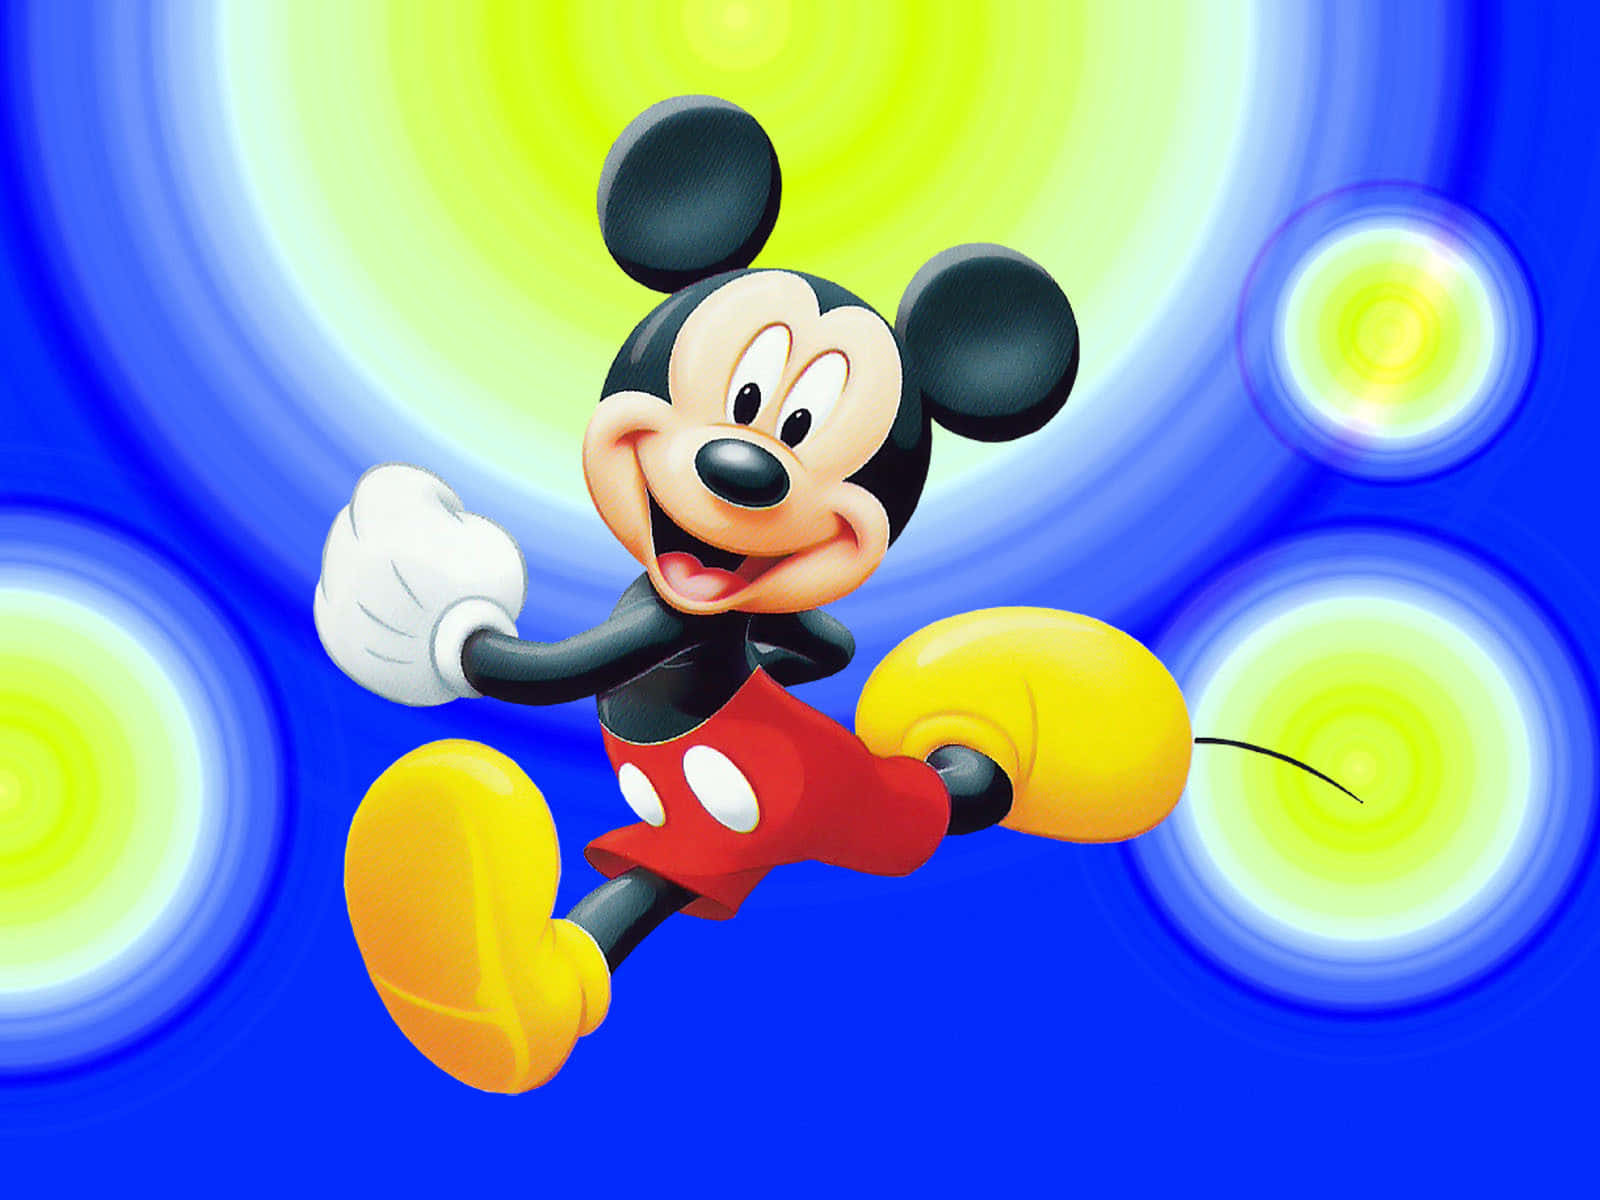 Cool as Mickey Mouse Wallpaper